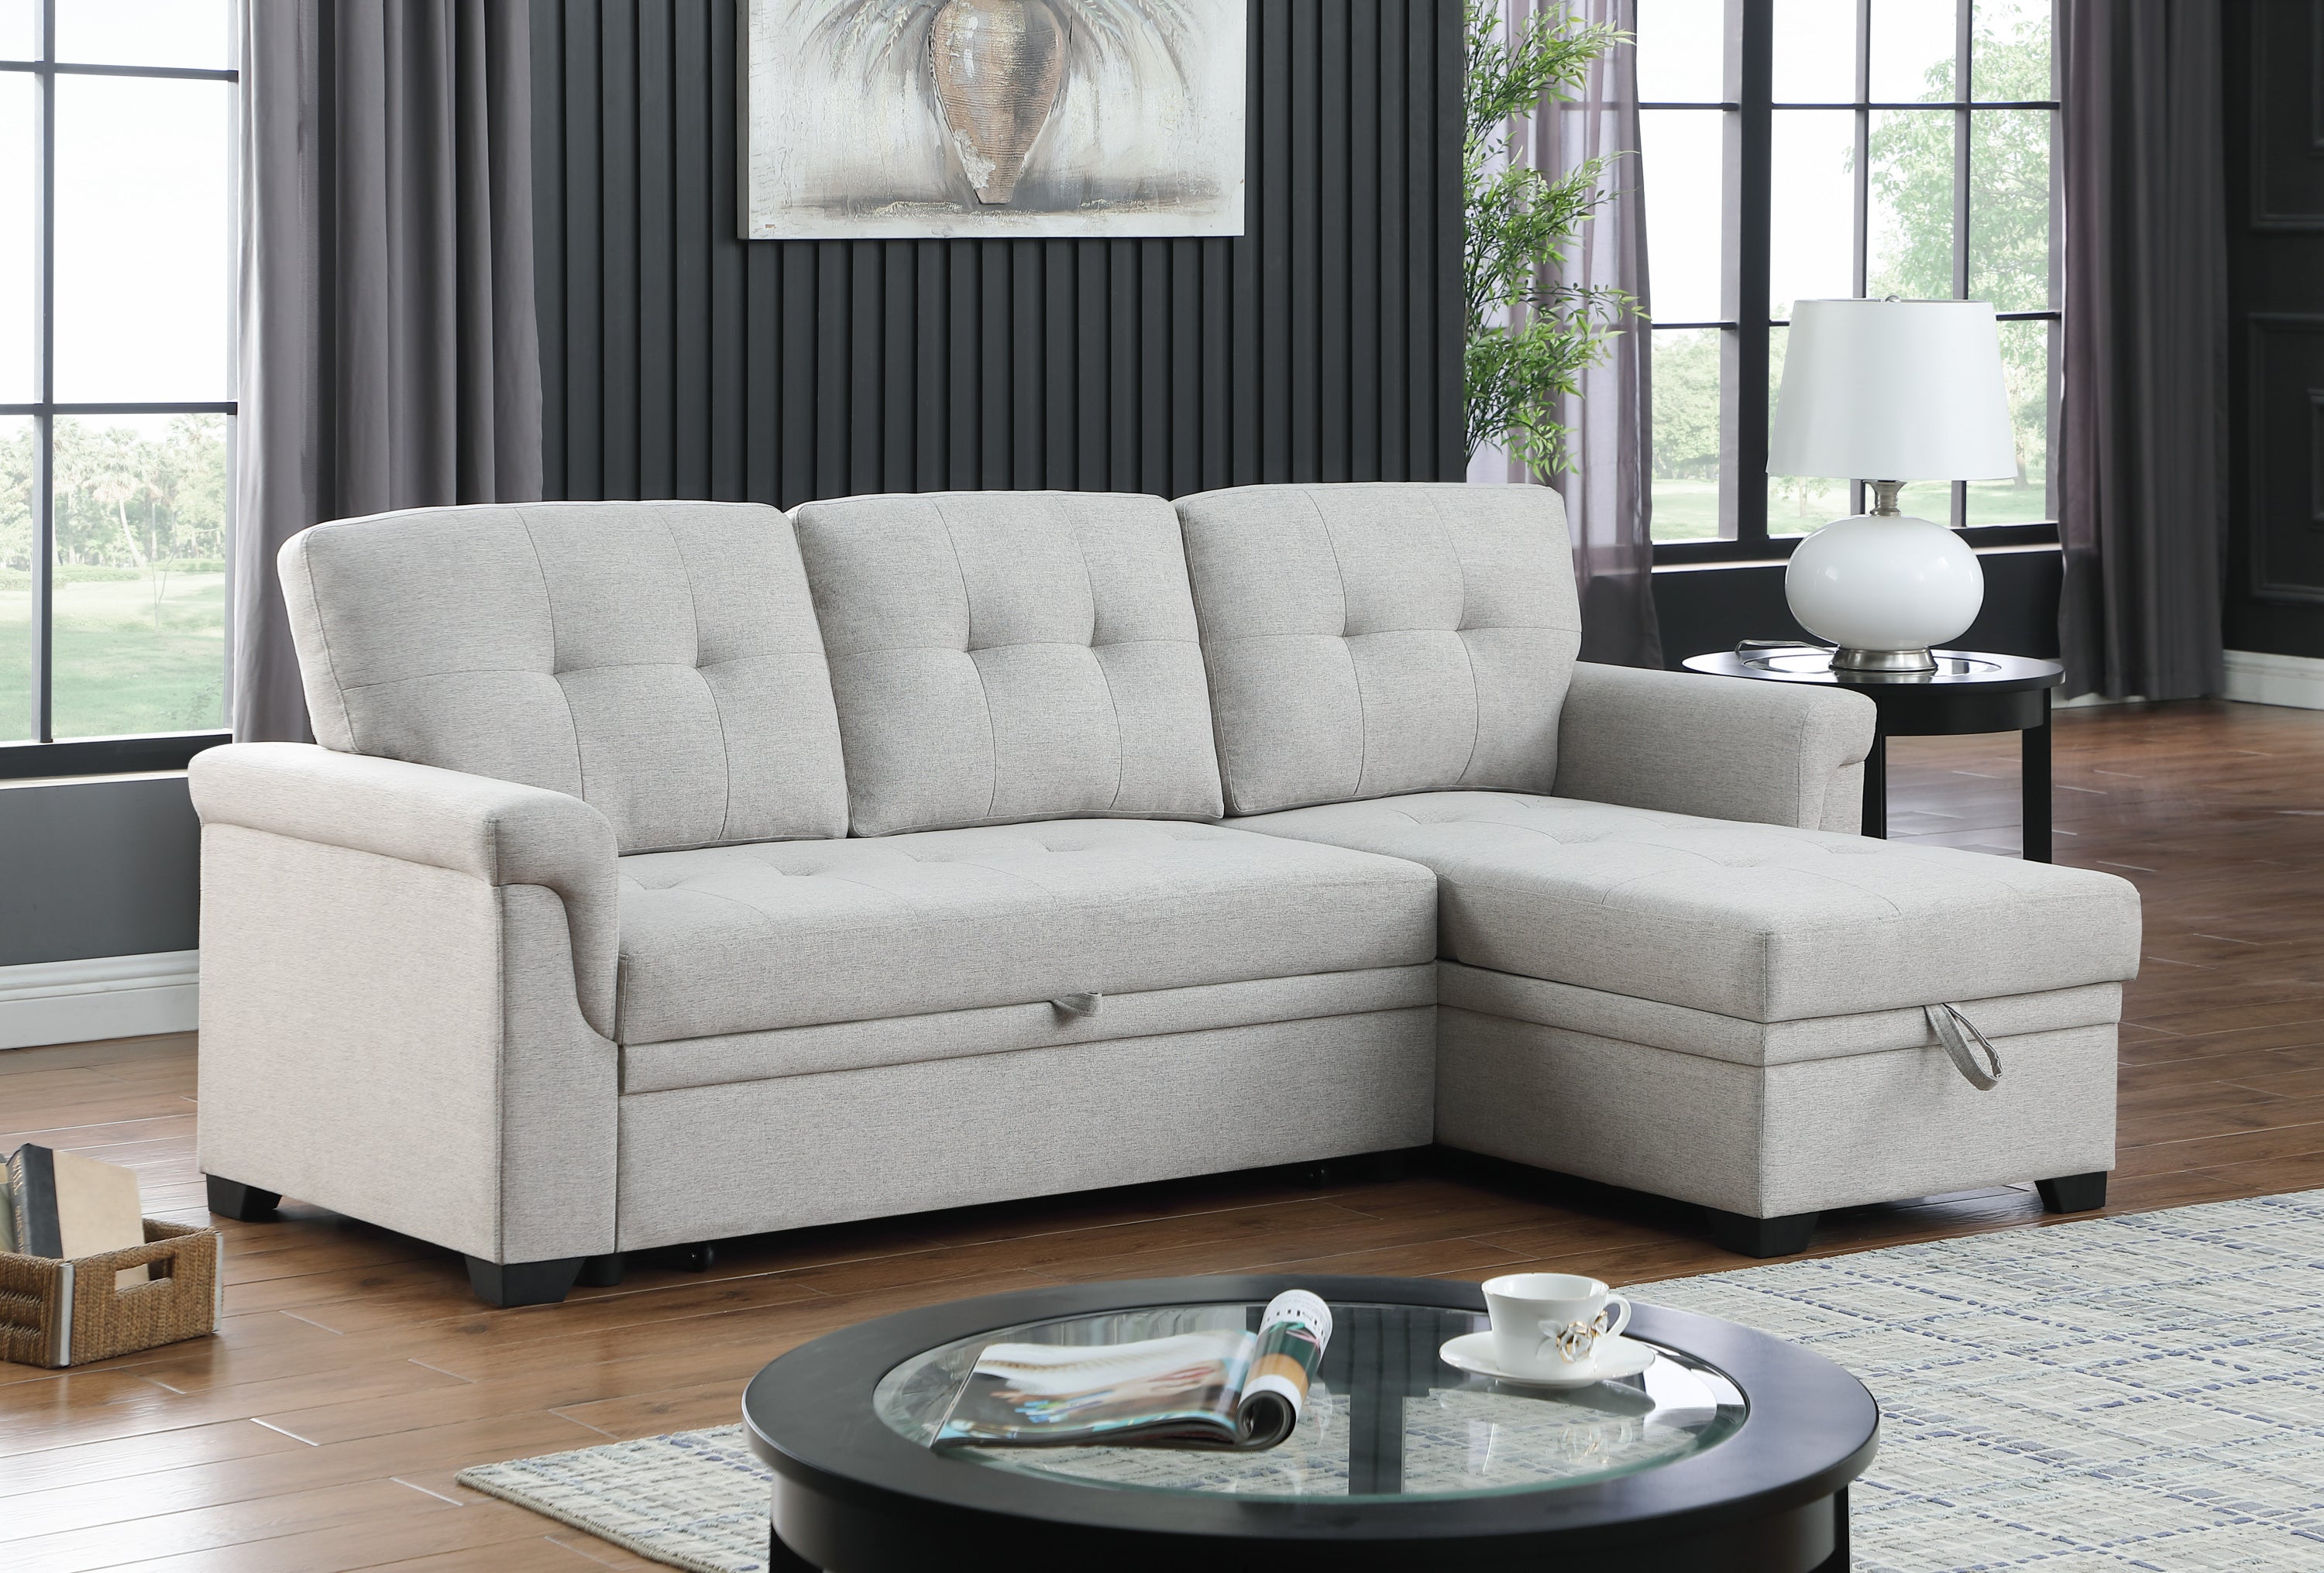 Lucca 84" Light Gray Linen Reversible Sleeper Sectional Sofa with Storage Chaise | Stylish and Functional Addition to Your Living Space